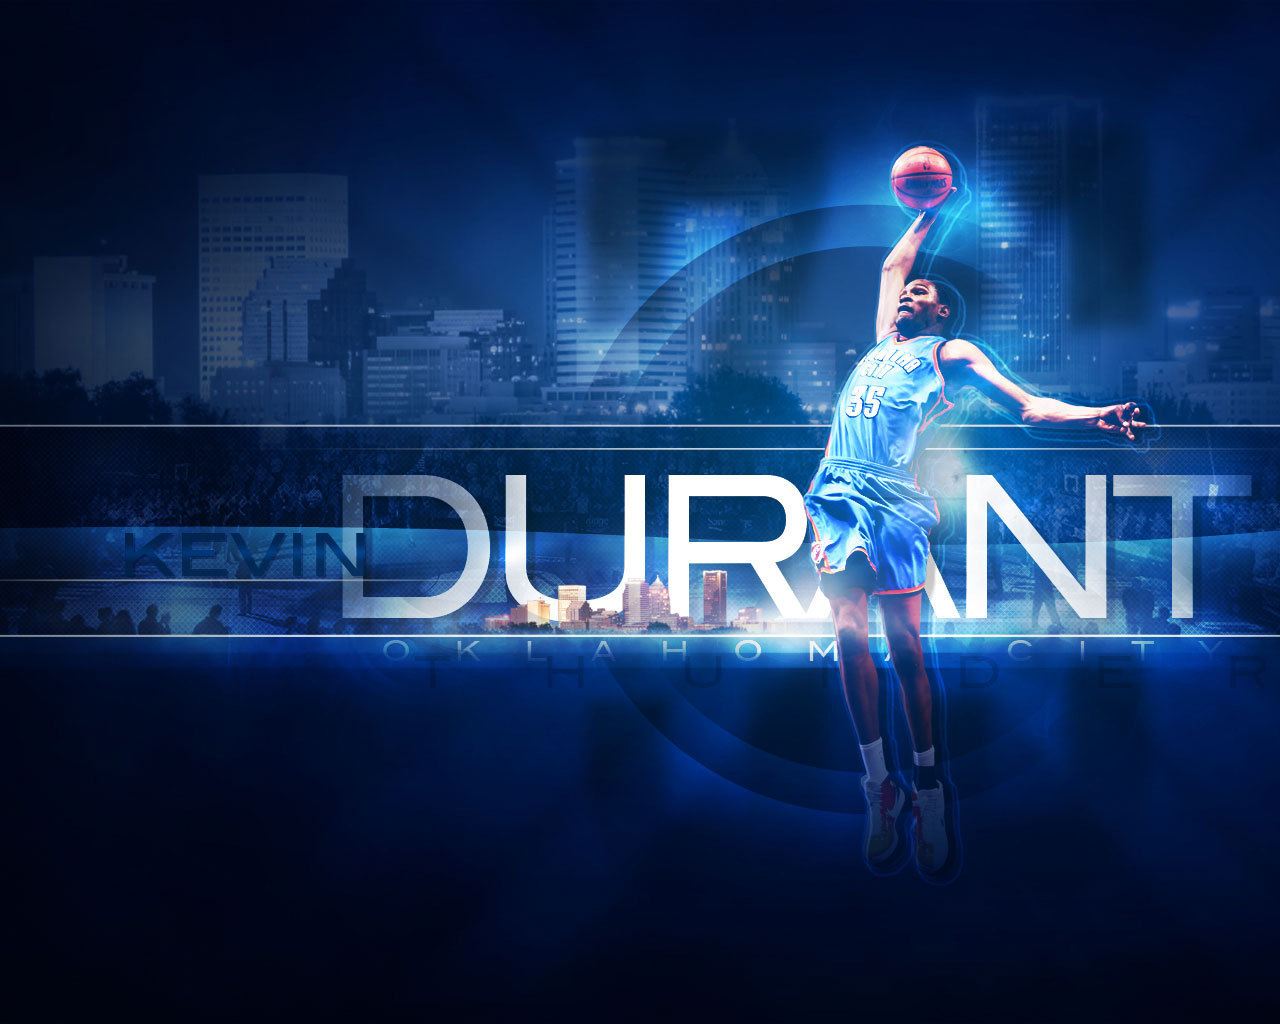 Kevin Durant Image Nice Background HD Wallpaper And